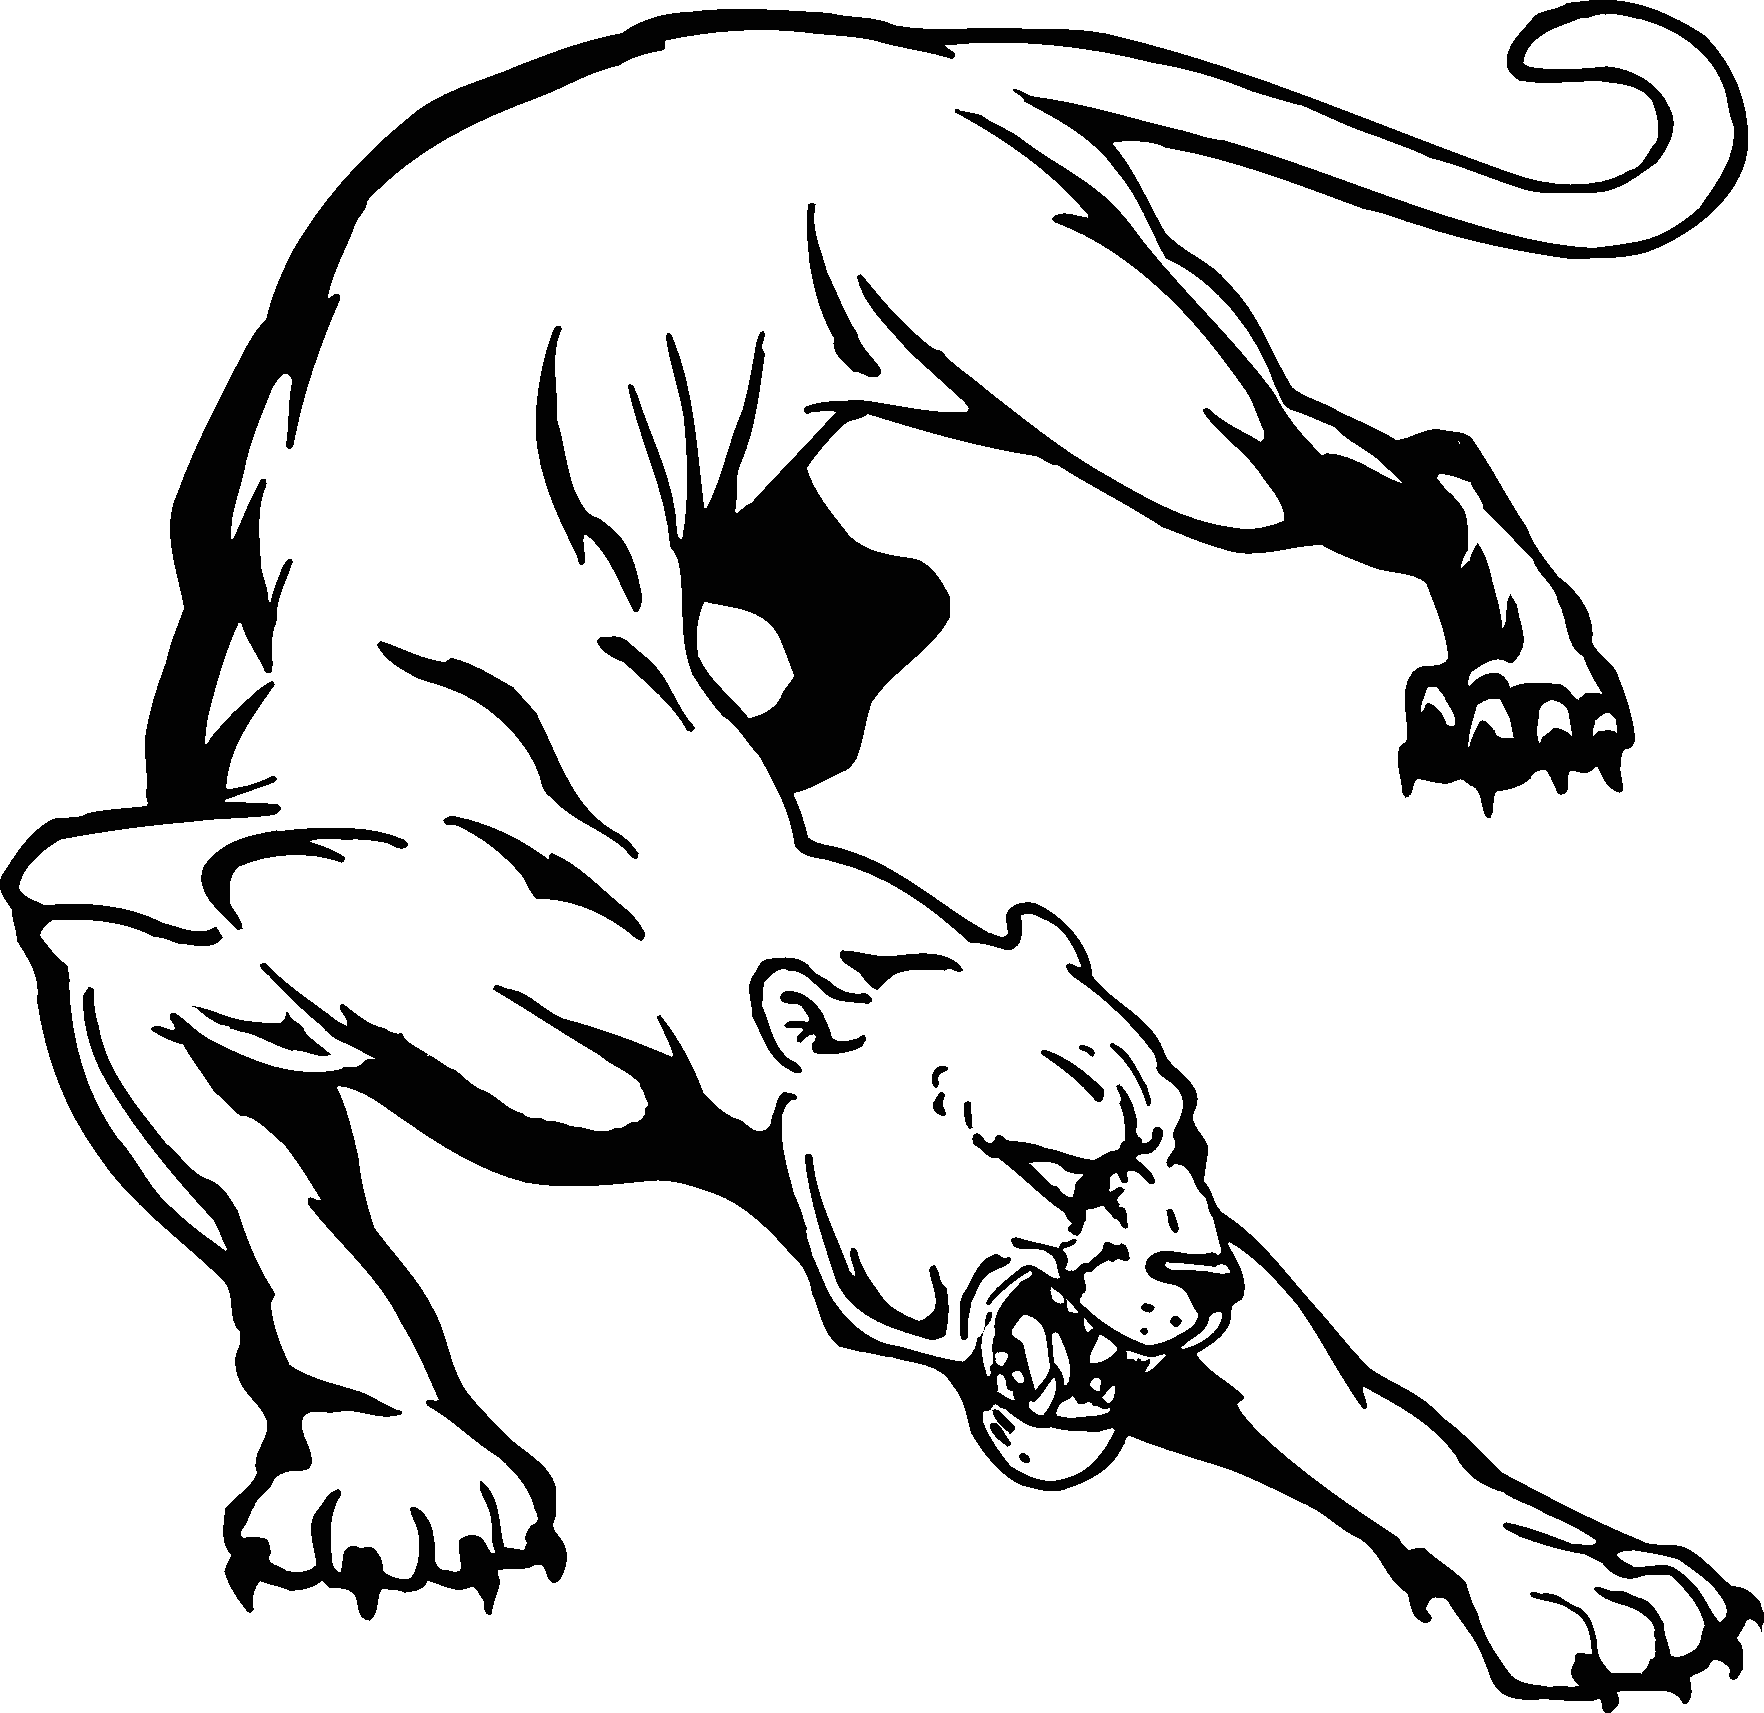 Free Cougar Mascot Clipart, Download Free Clip Art, Free Clip Art on.